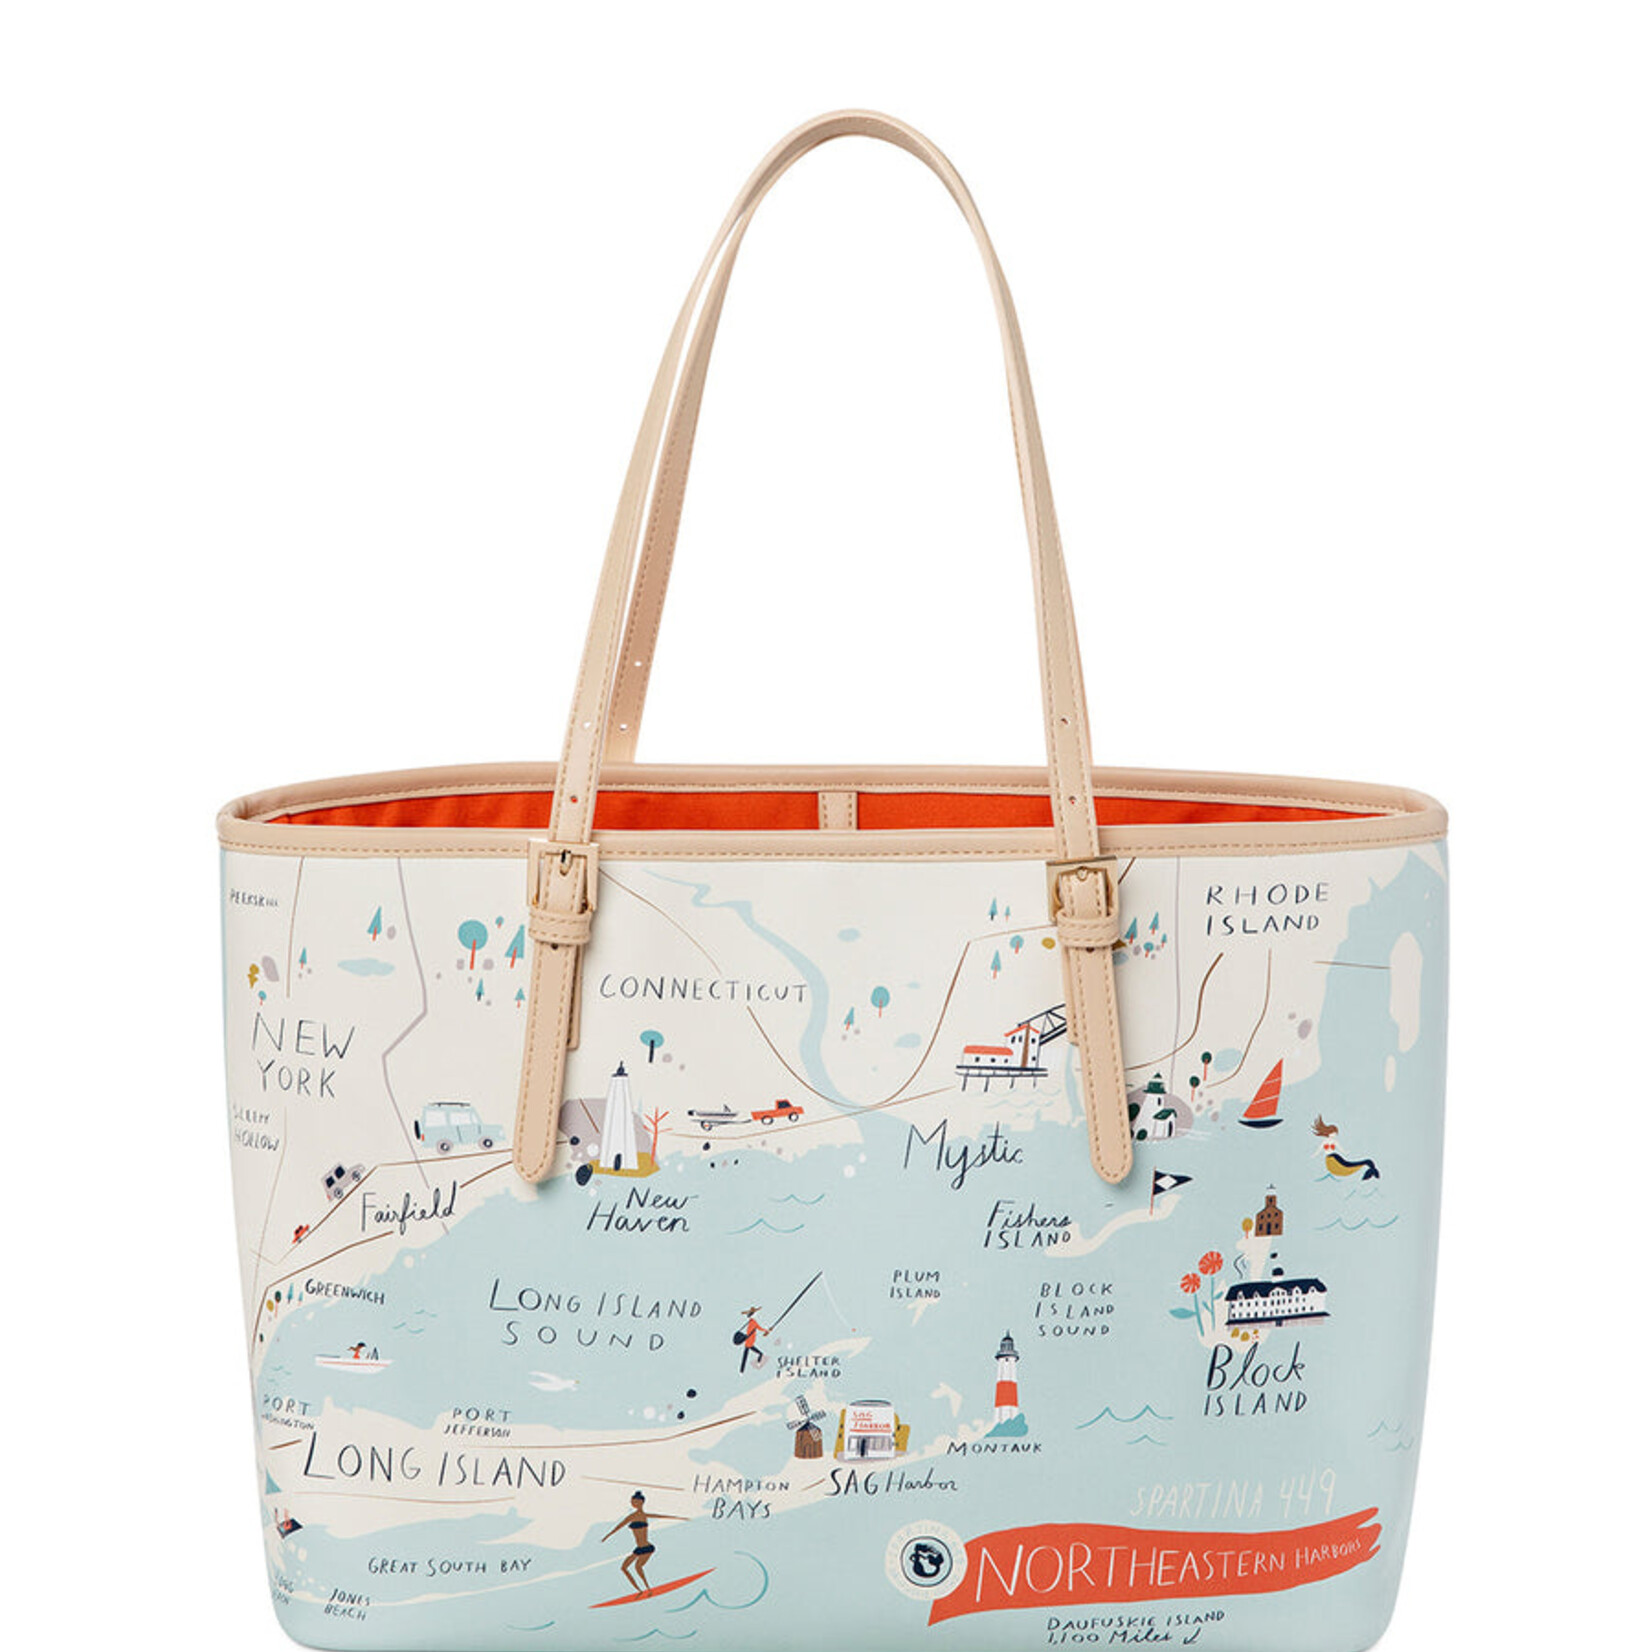 Spartina 449 Northeastern Harbors Carry All Case | Women's Travel Bags |  Accessories - Shop Your Navy Exchange - Official Site